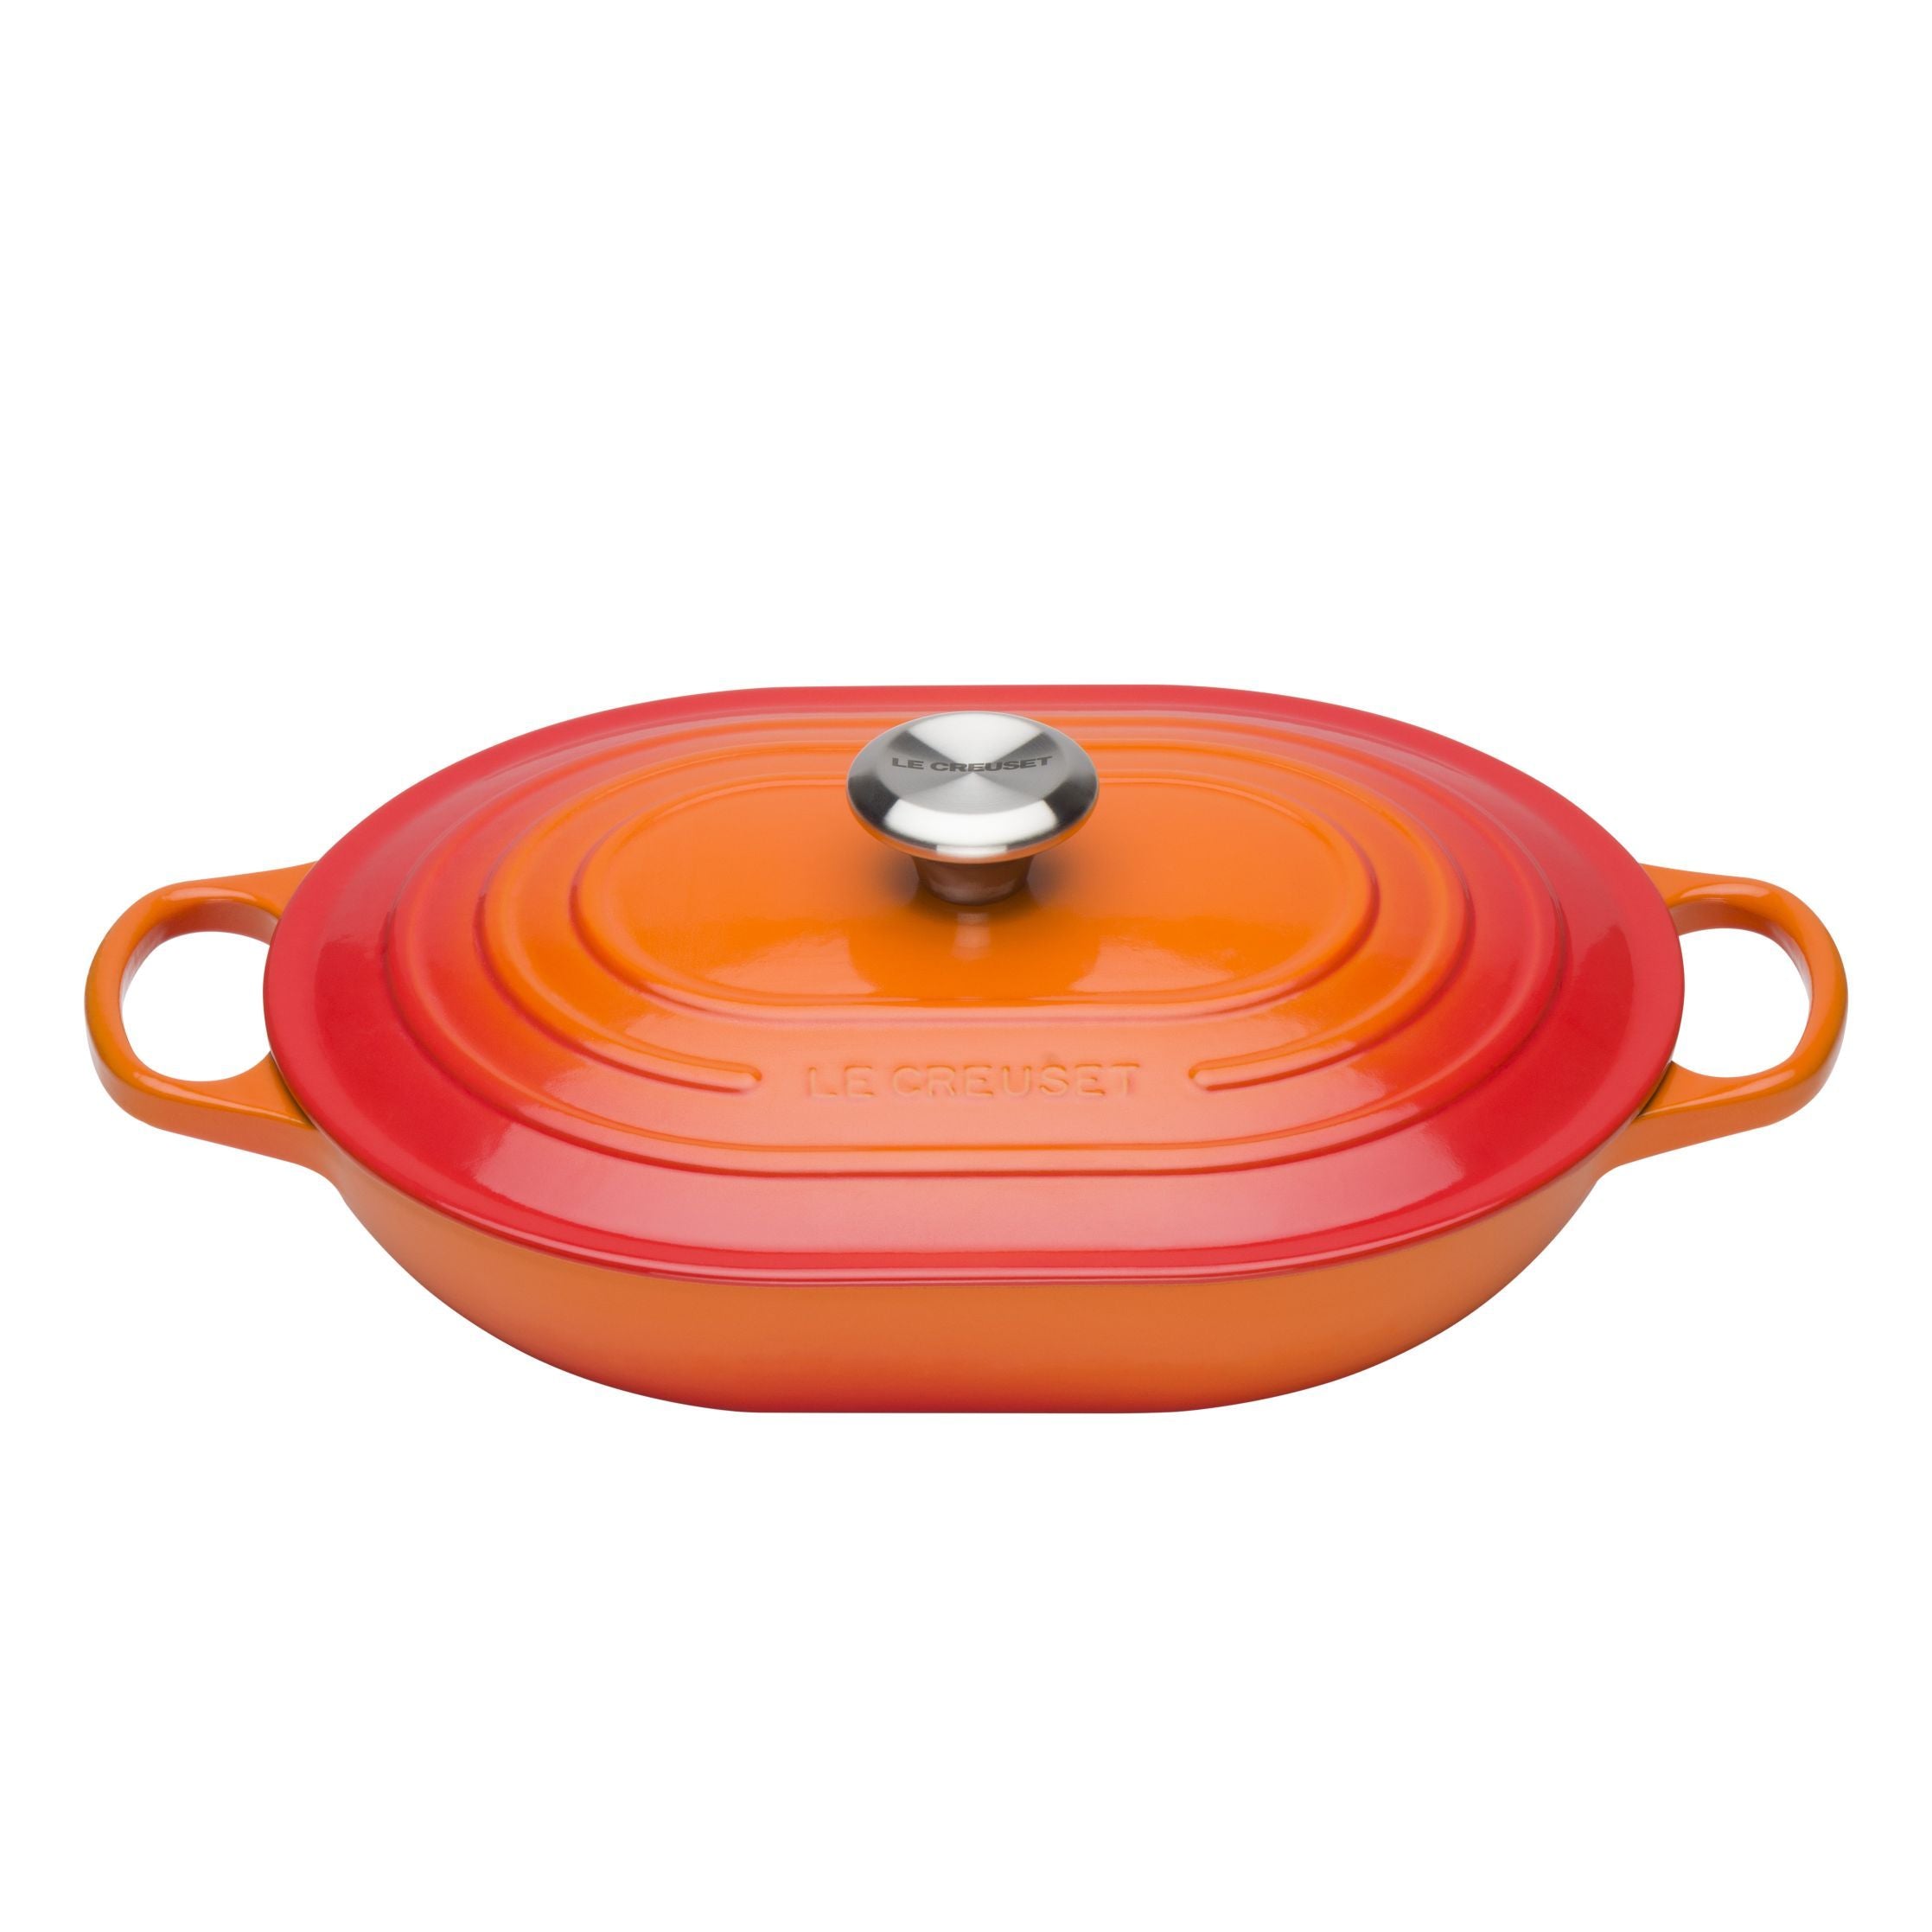 Le Creuset Nature Langce Roaster 3,4 L, Oven Red